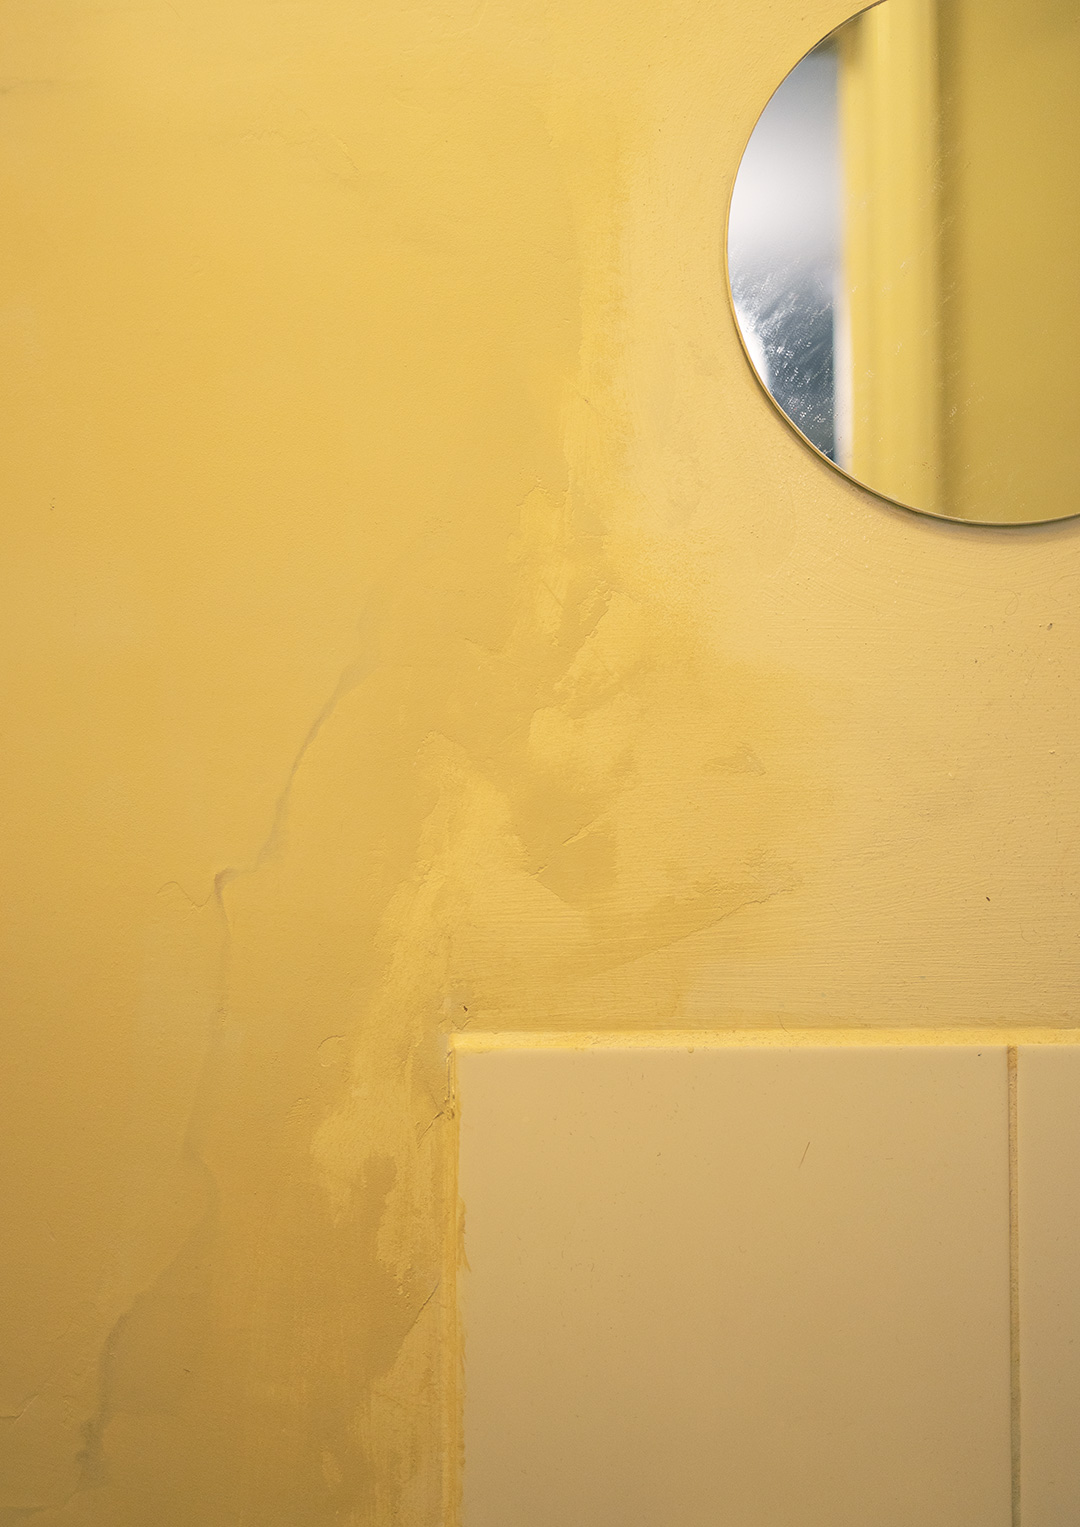 Photo of patchy paint on bathroom wall